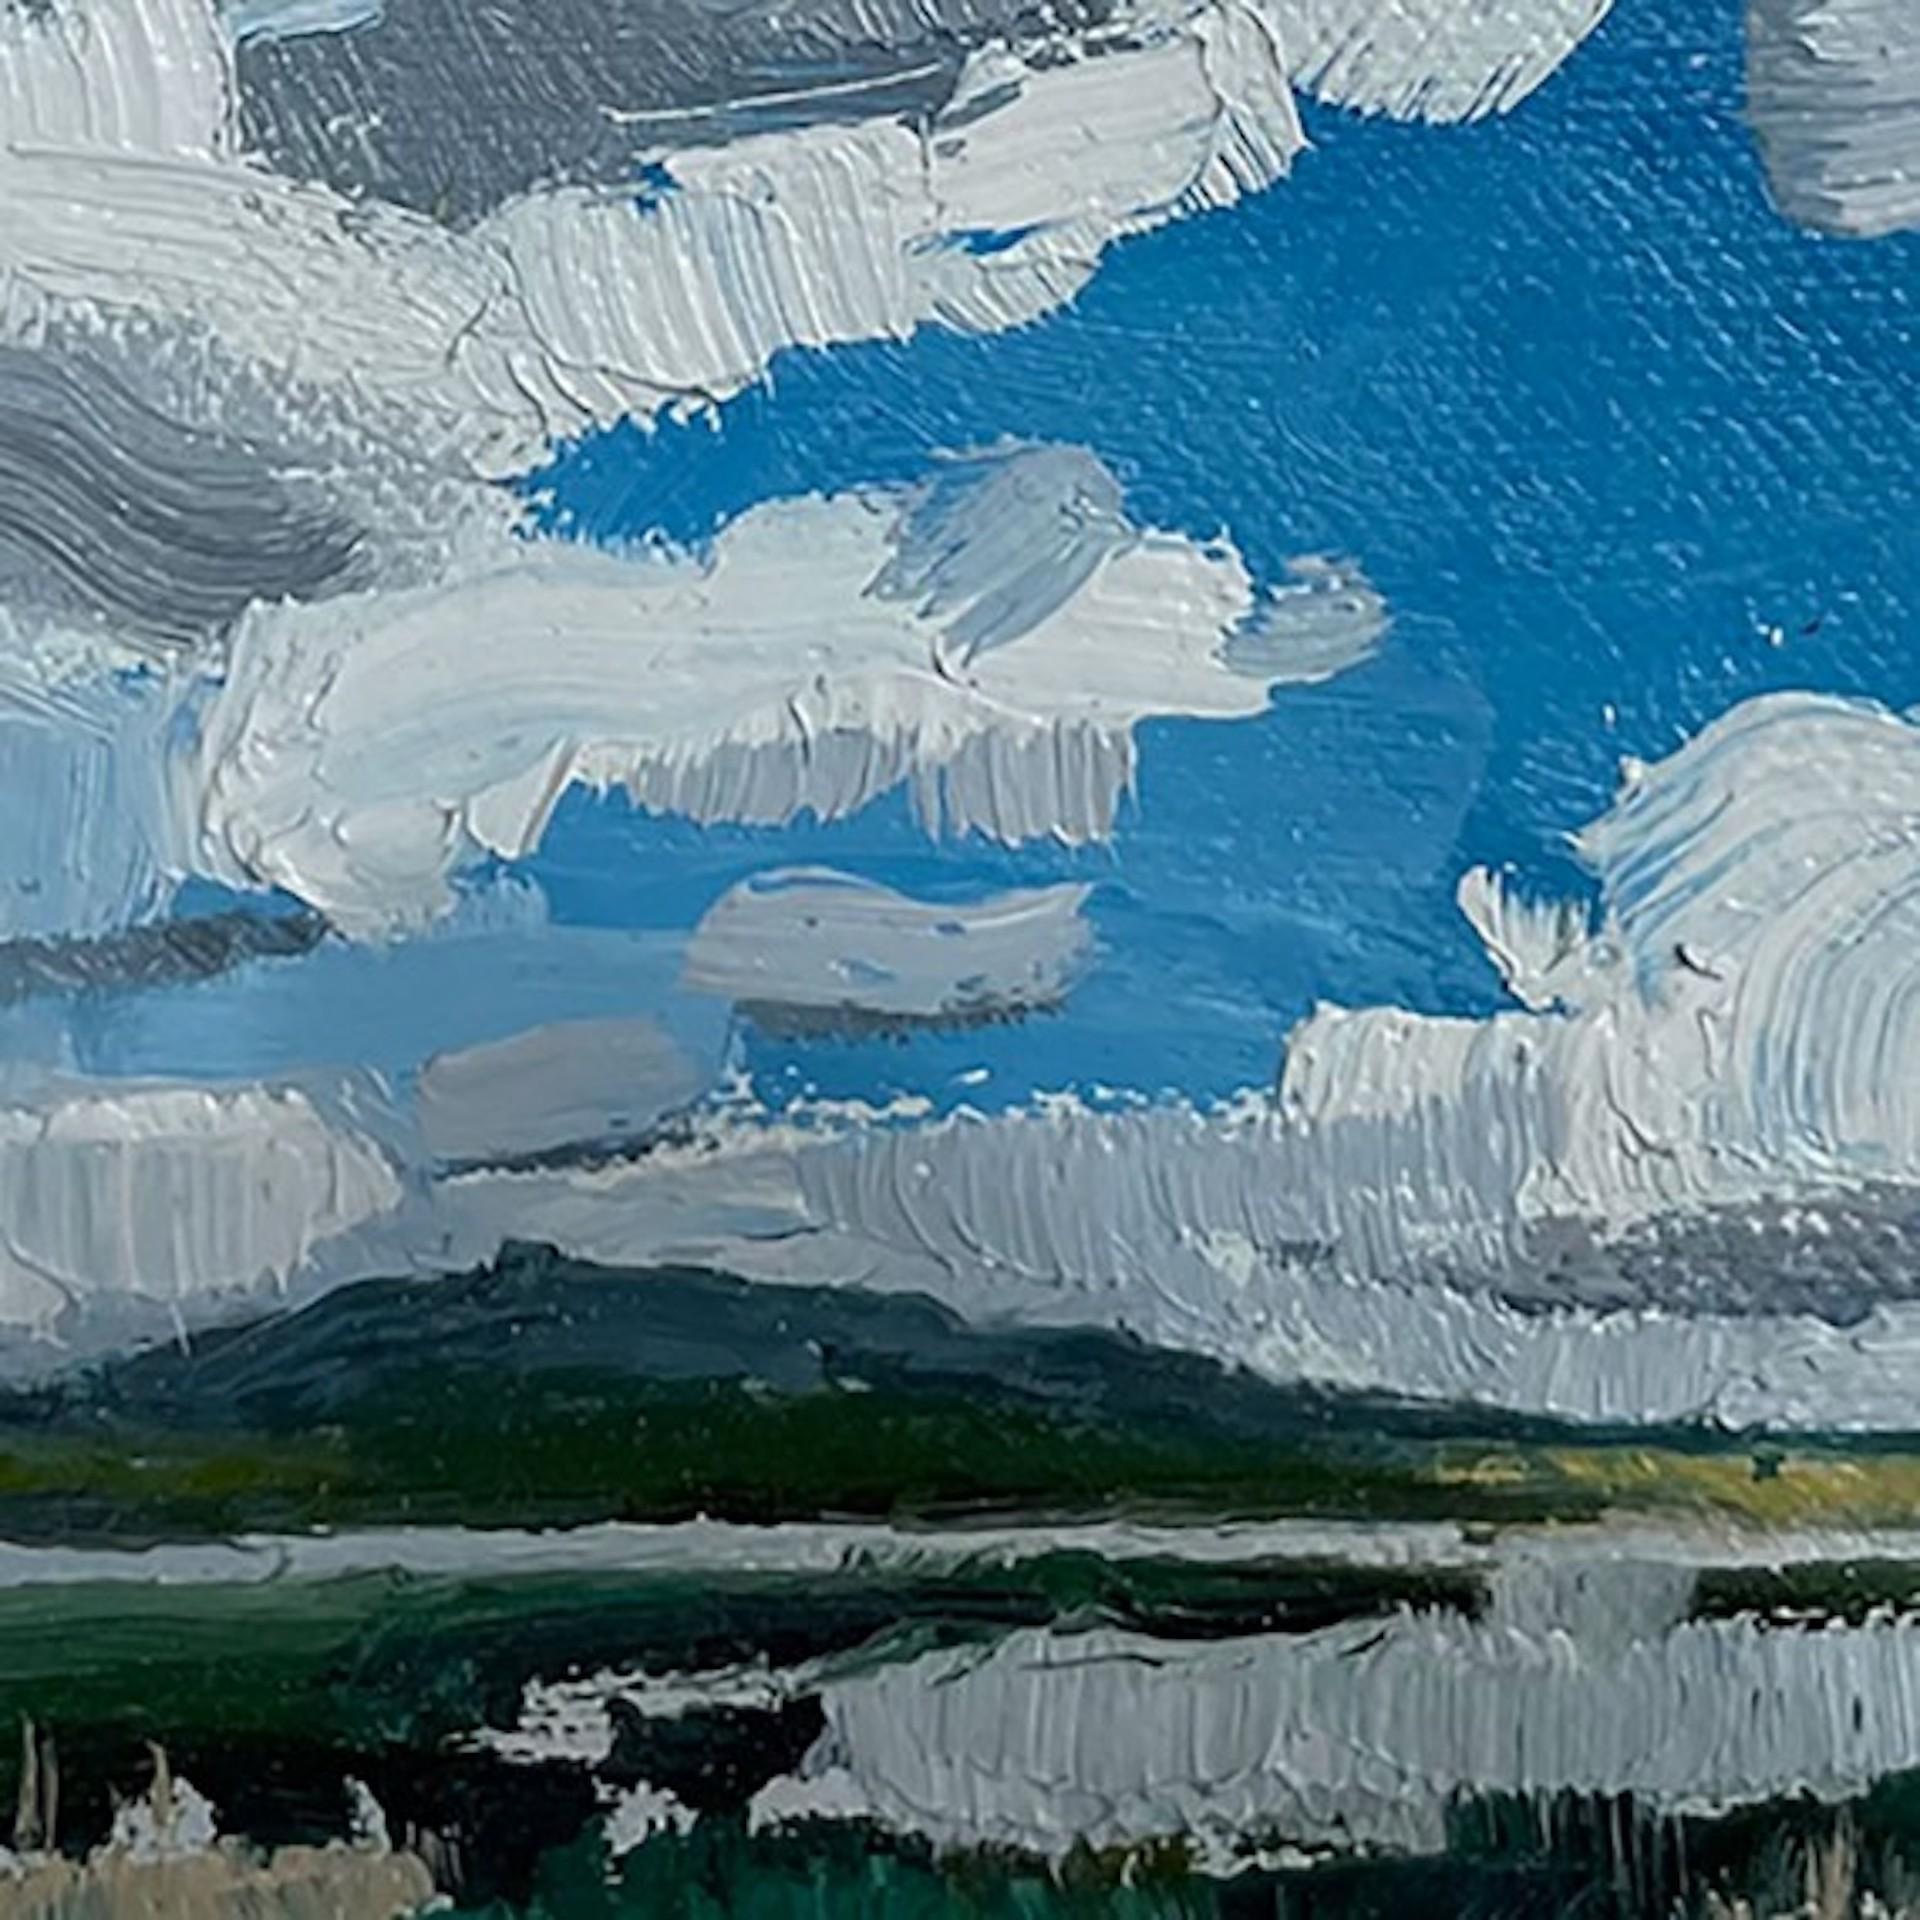 From the Kingfisher Hide 2 [June 2021]
Original
Landscapes and seascapes
Oil Pain on Canvas
Complete Size of Unframed Work: H:15.2 cm x W:20.3 cm x D:3.8cm
Sold Unframed
Please note that insitu images are purely an indication of how a piece may